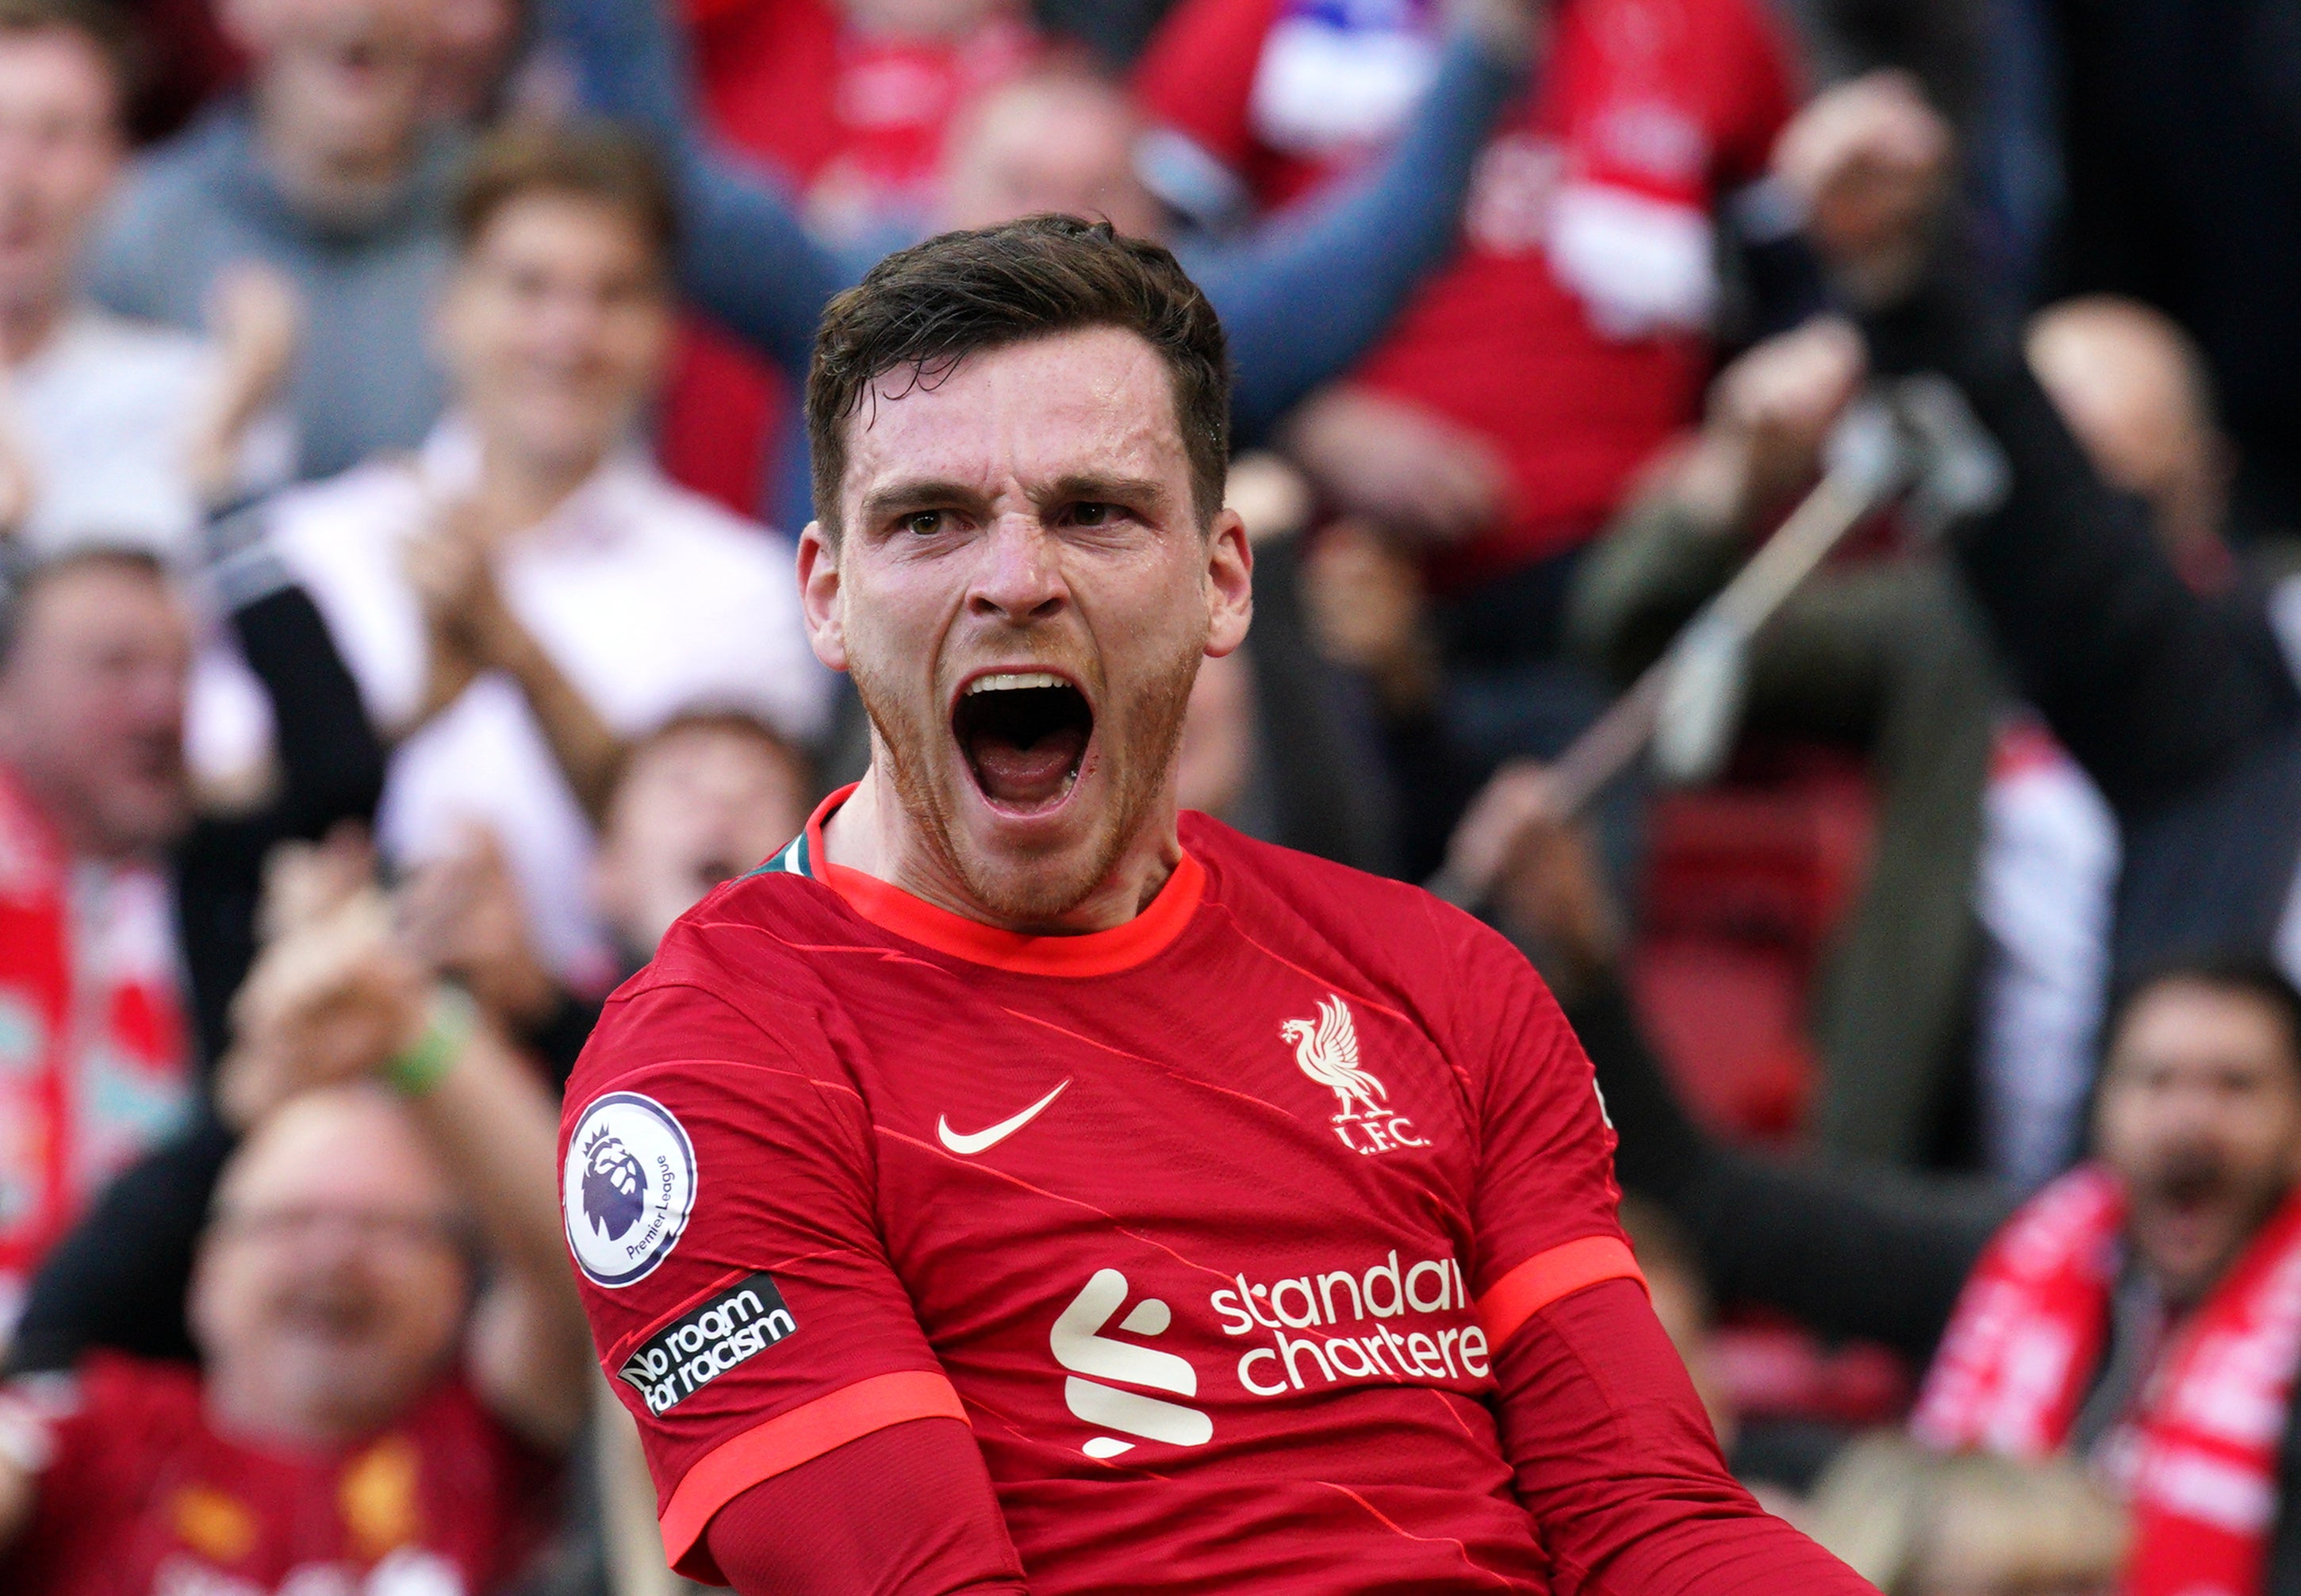 Liverpool’s Andy Robertson celebrates scoring his side’s first goal against Everton at Anfield (Peter Byrne/PA)